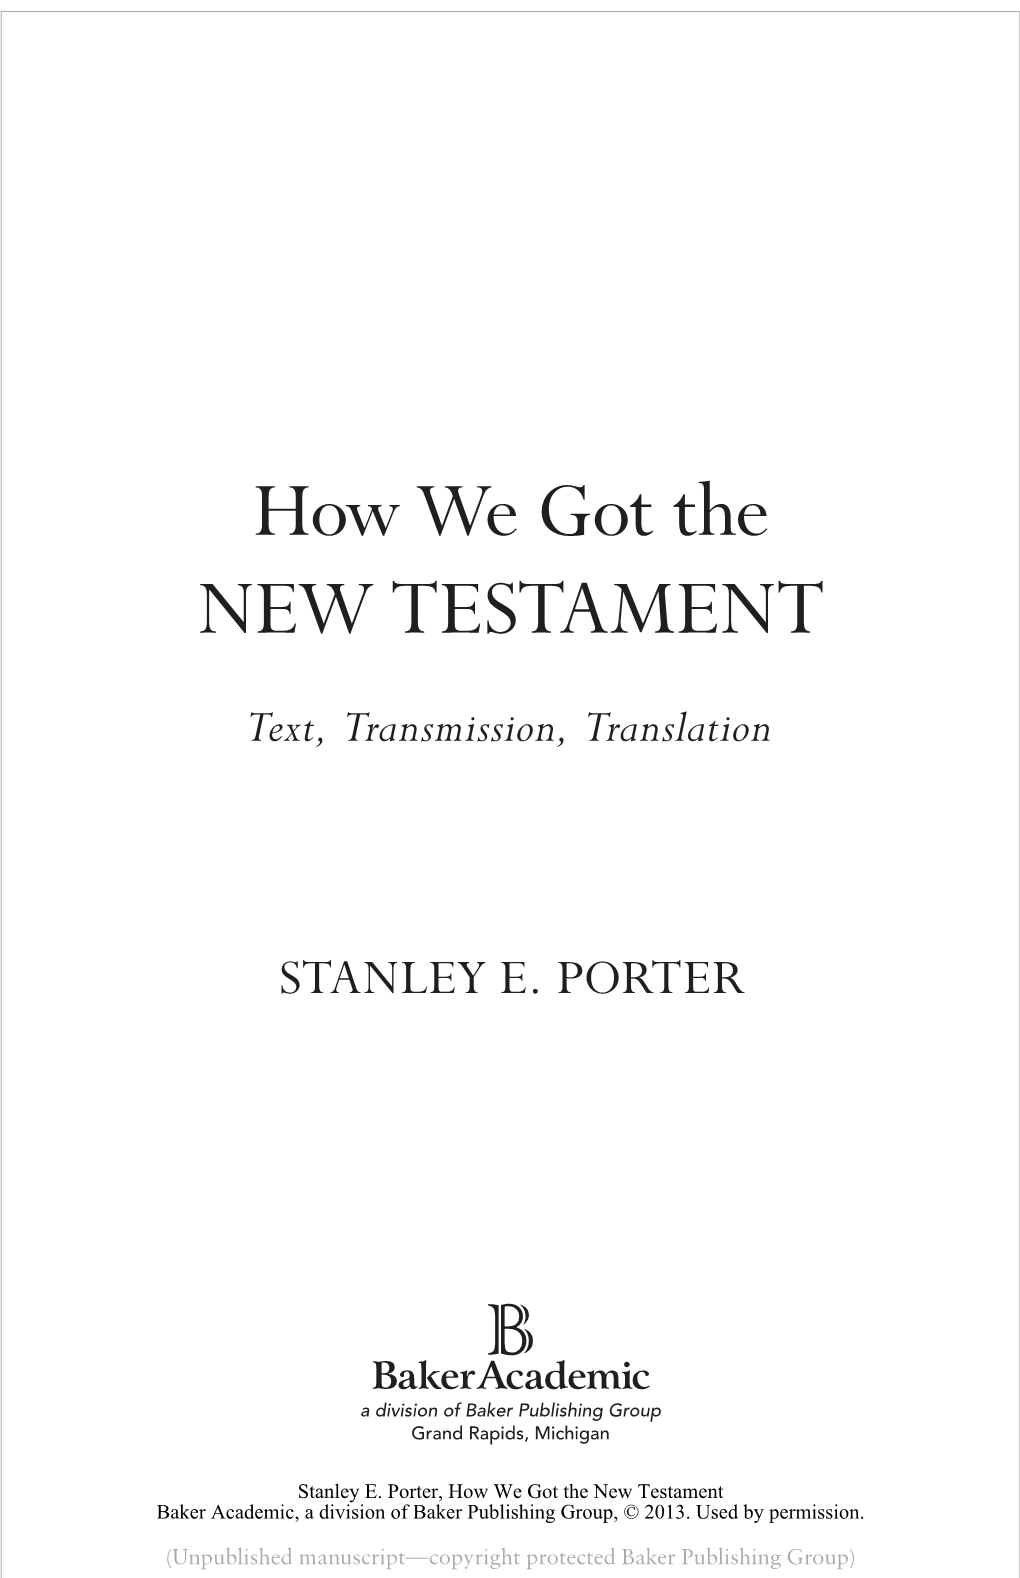 How We Got the NEW TESTAMENT